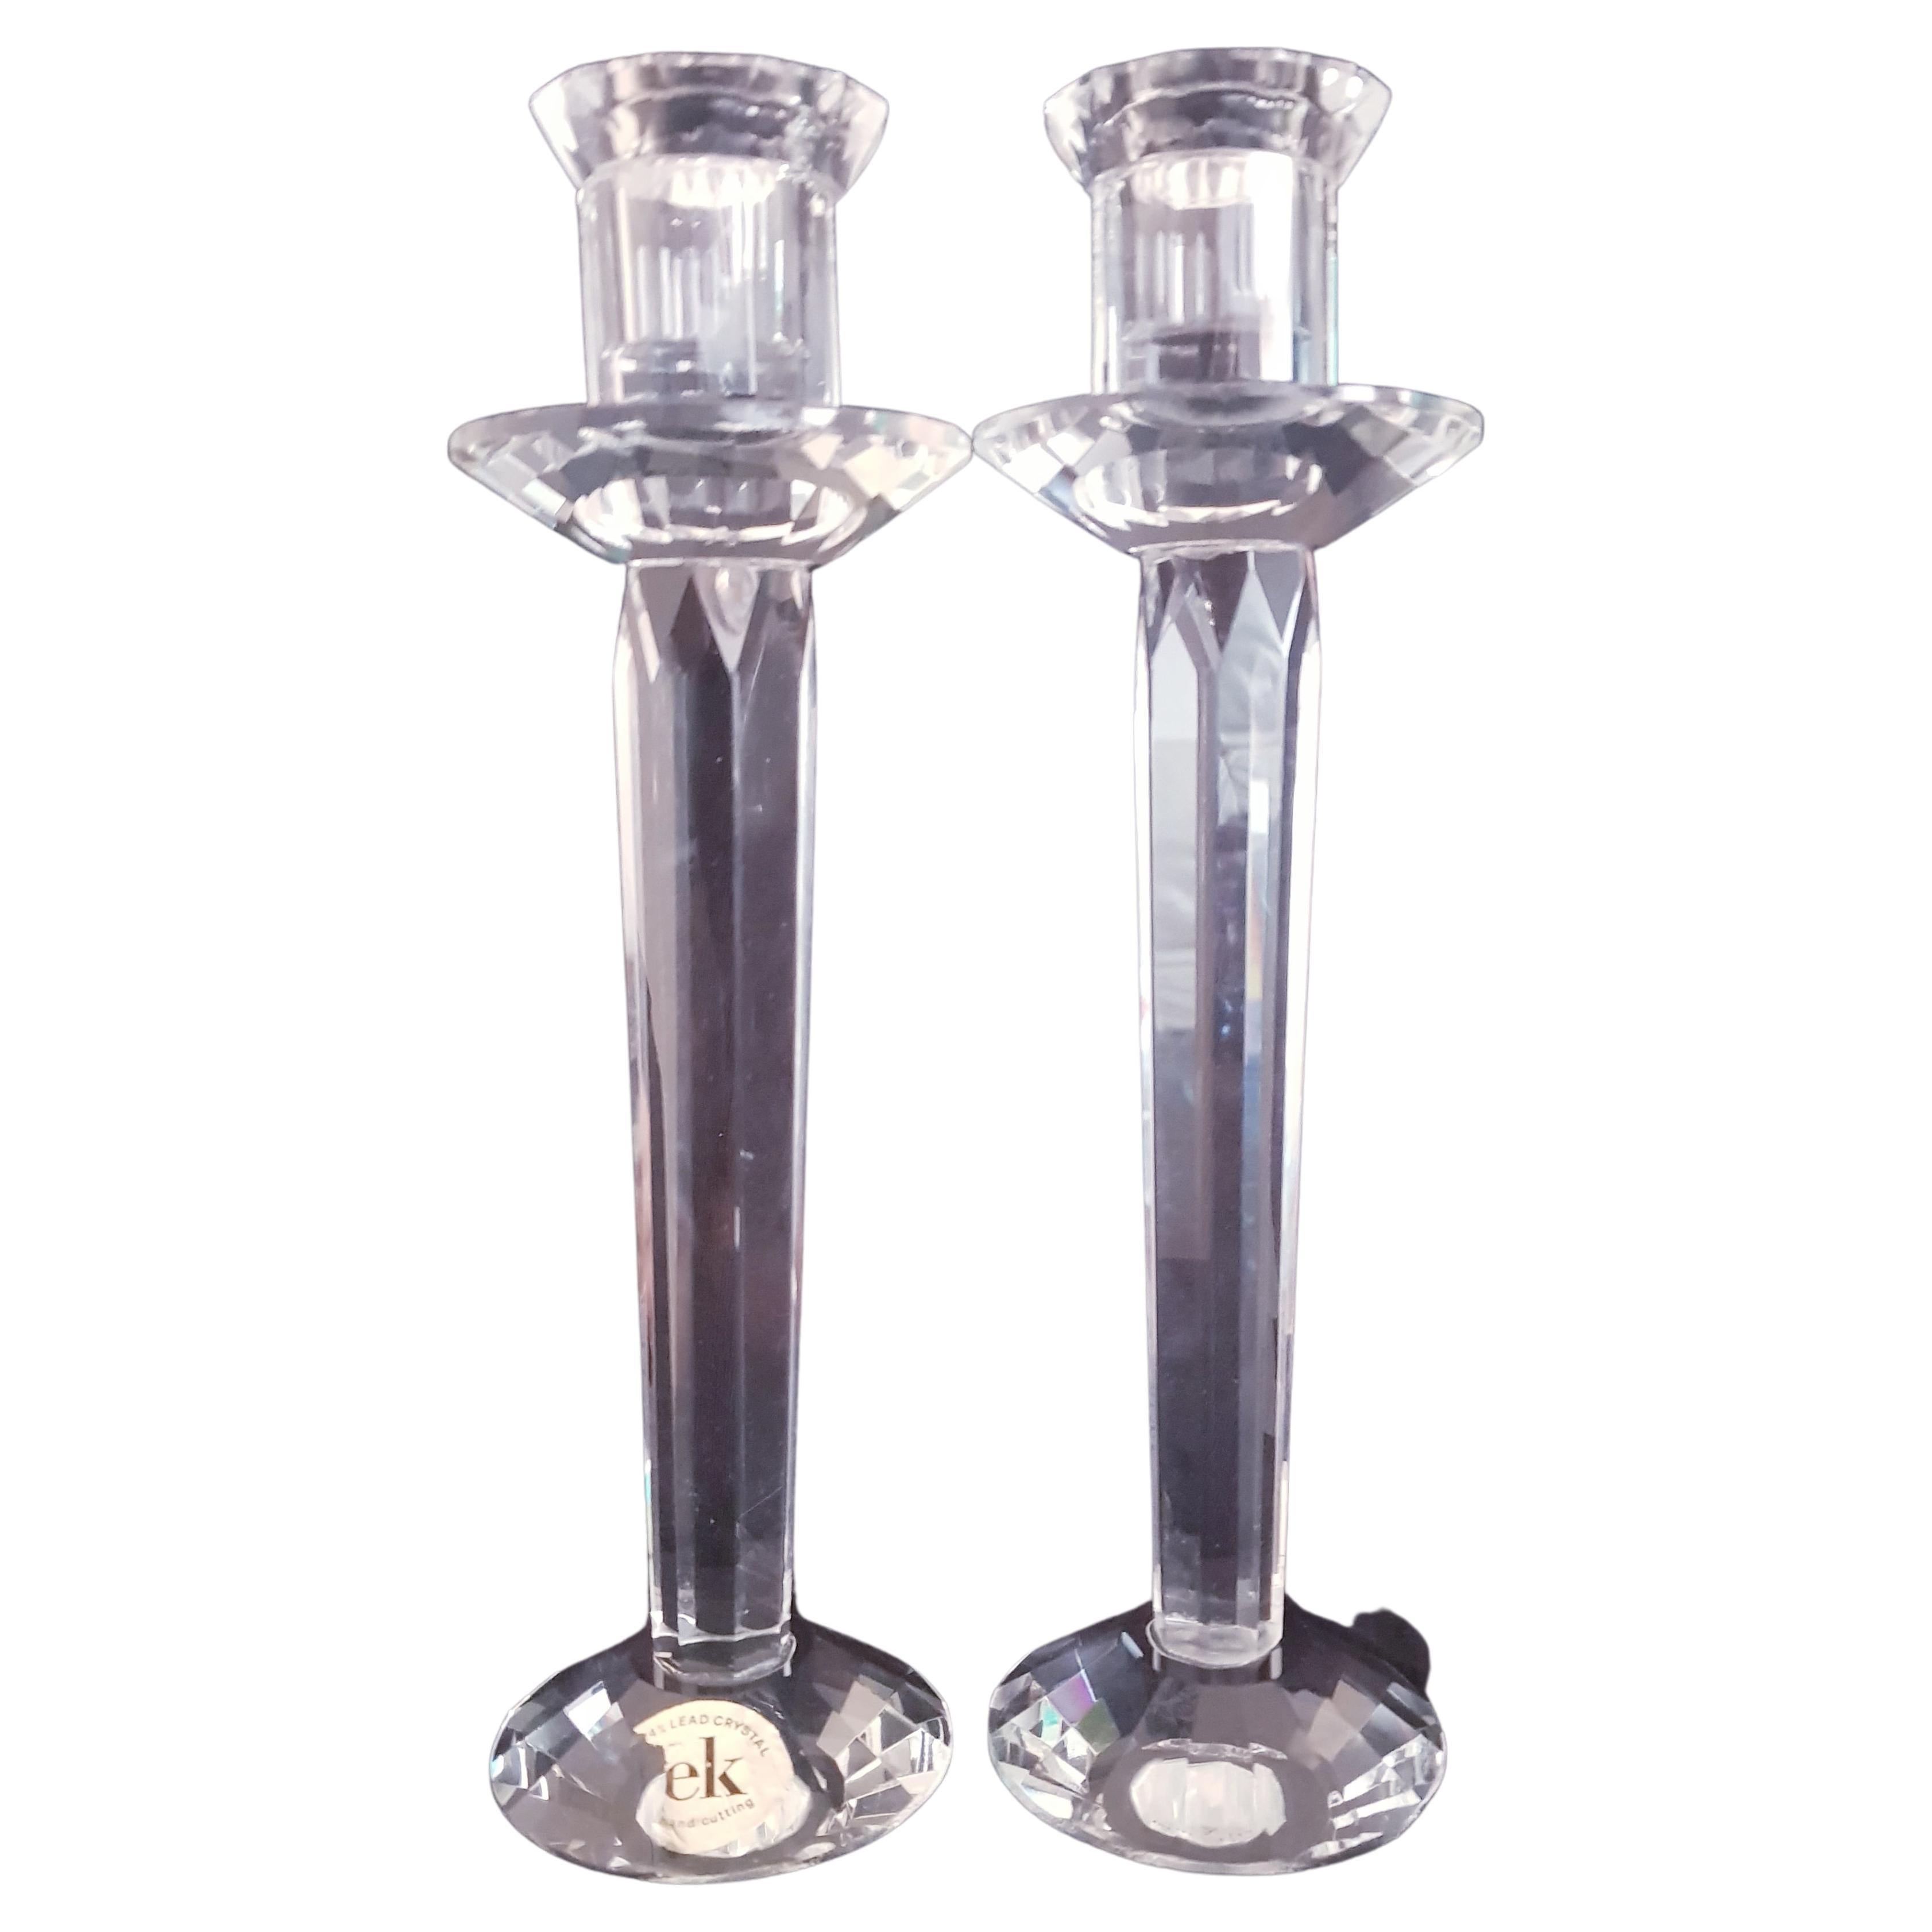 Vitange Brilliant Faceted Crystal Candle Holders